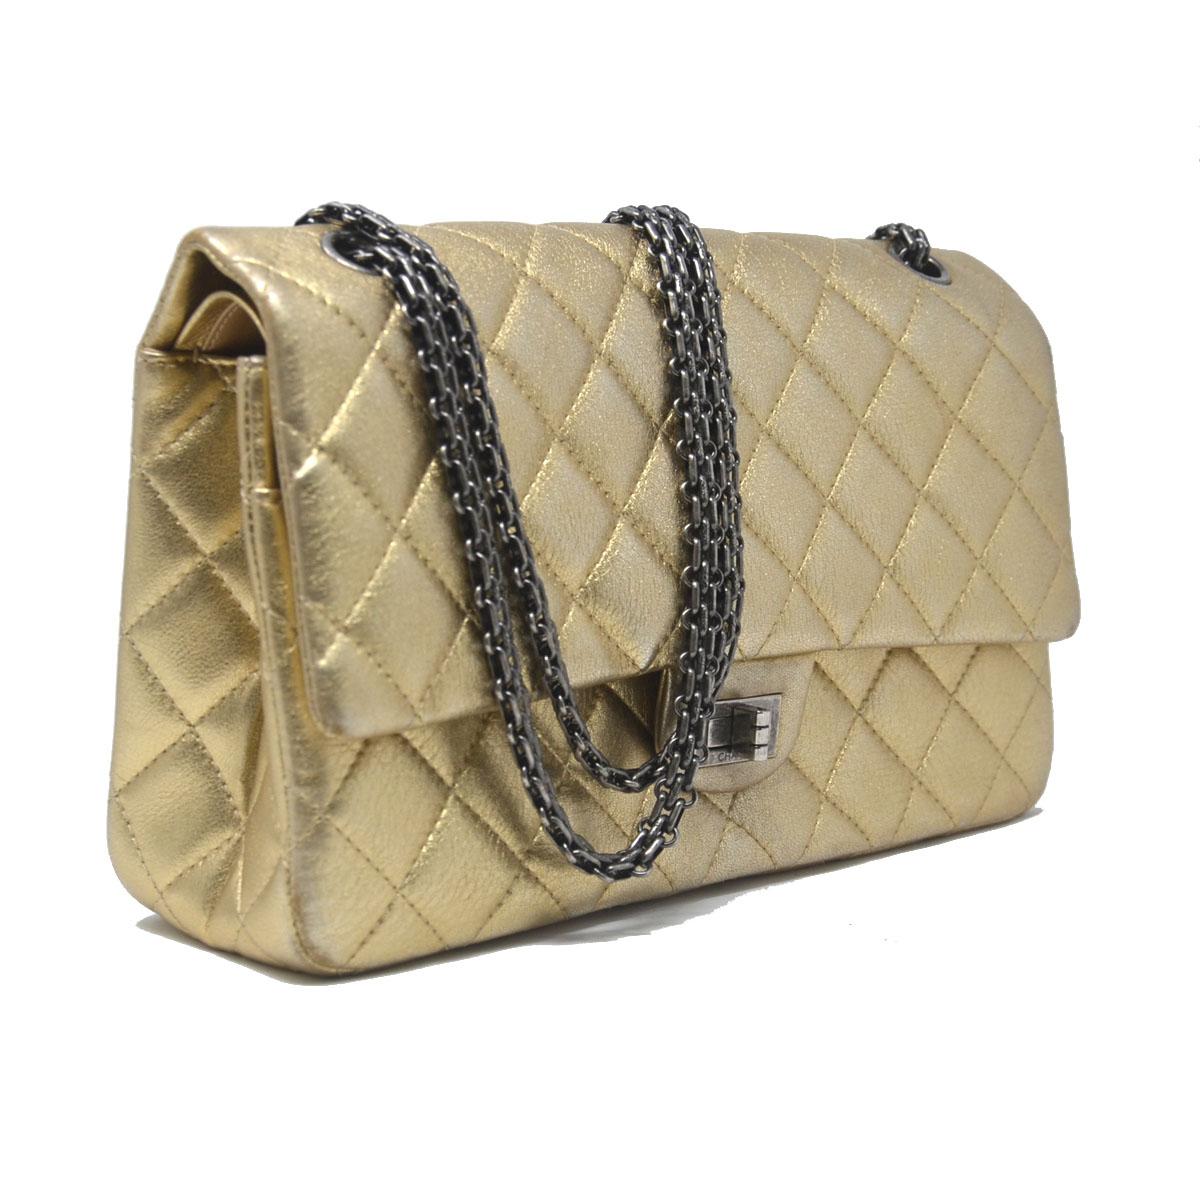 Company-Chanel
Model-2.55 Reissue Jumbo Double Flap Chevron 
Color-Gold 
Date Code-19171061
Material-Leather
Measurements-11